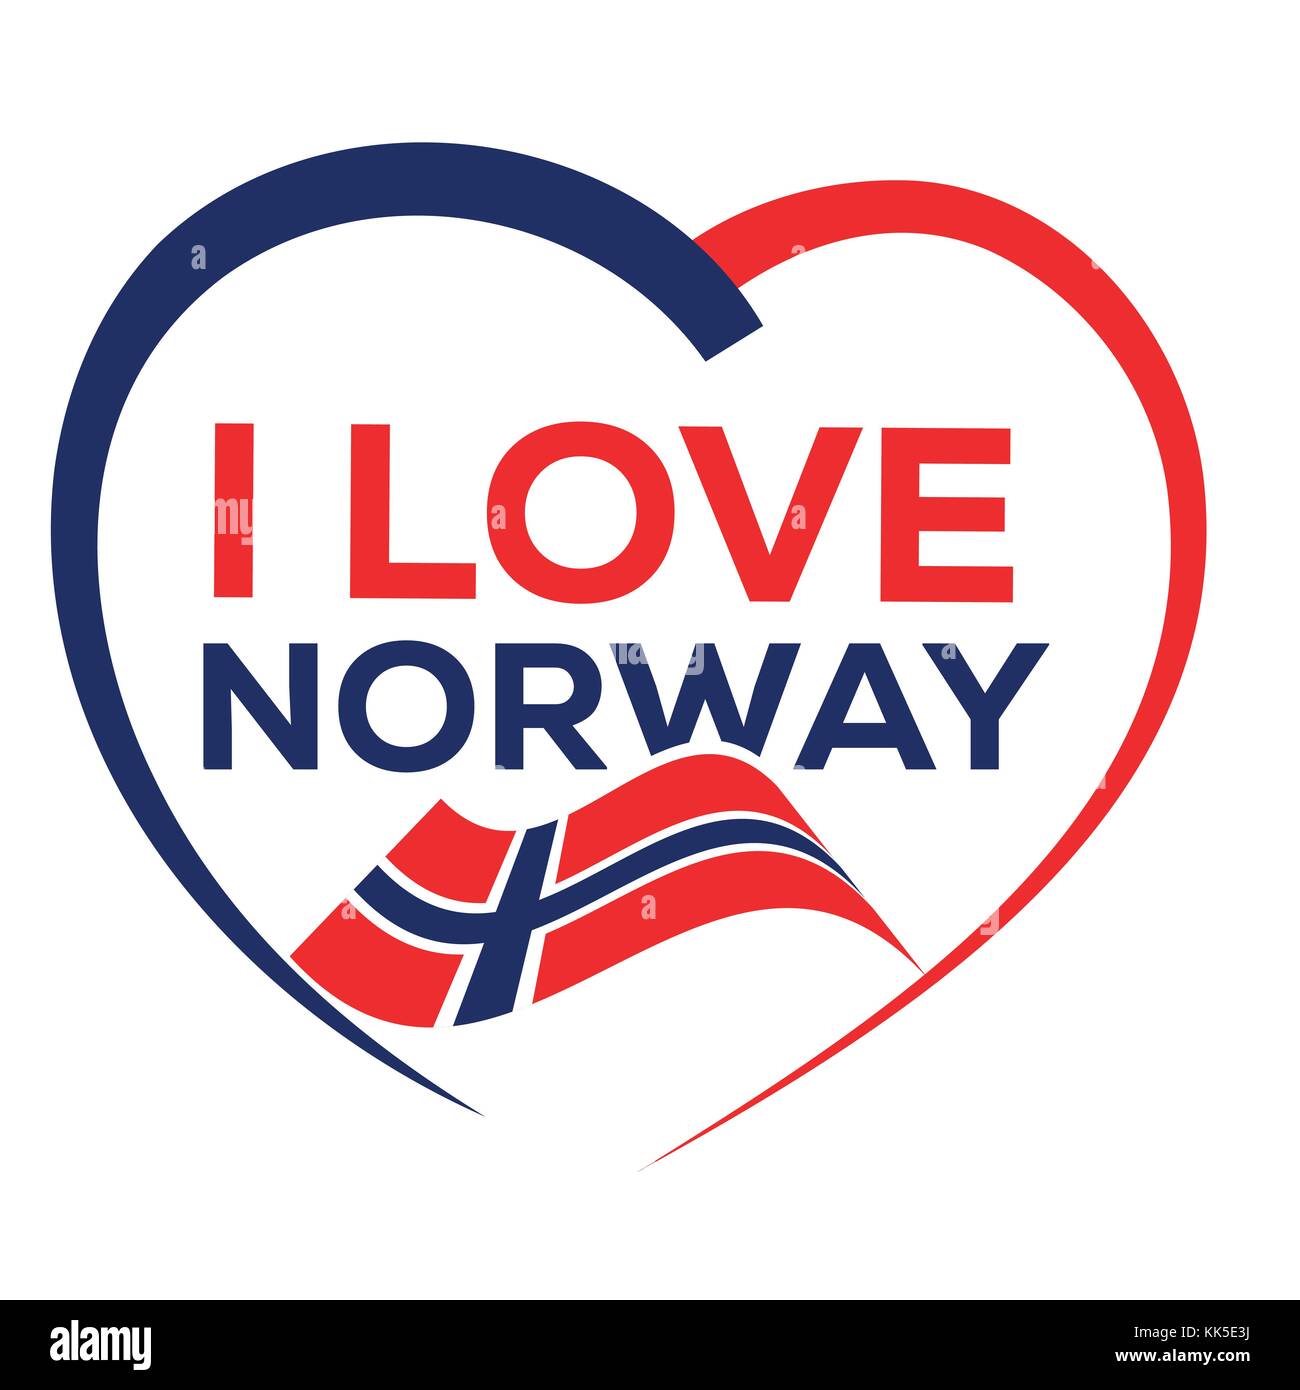 I love norway with outline of heart and flag of norway, icon design, isolated on white background. Stock Vector